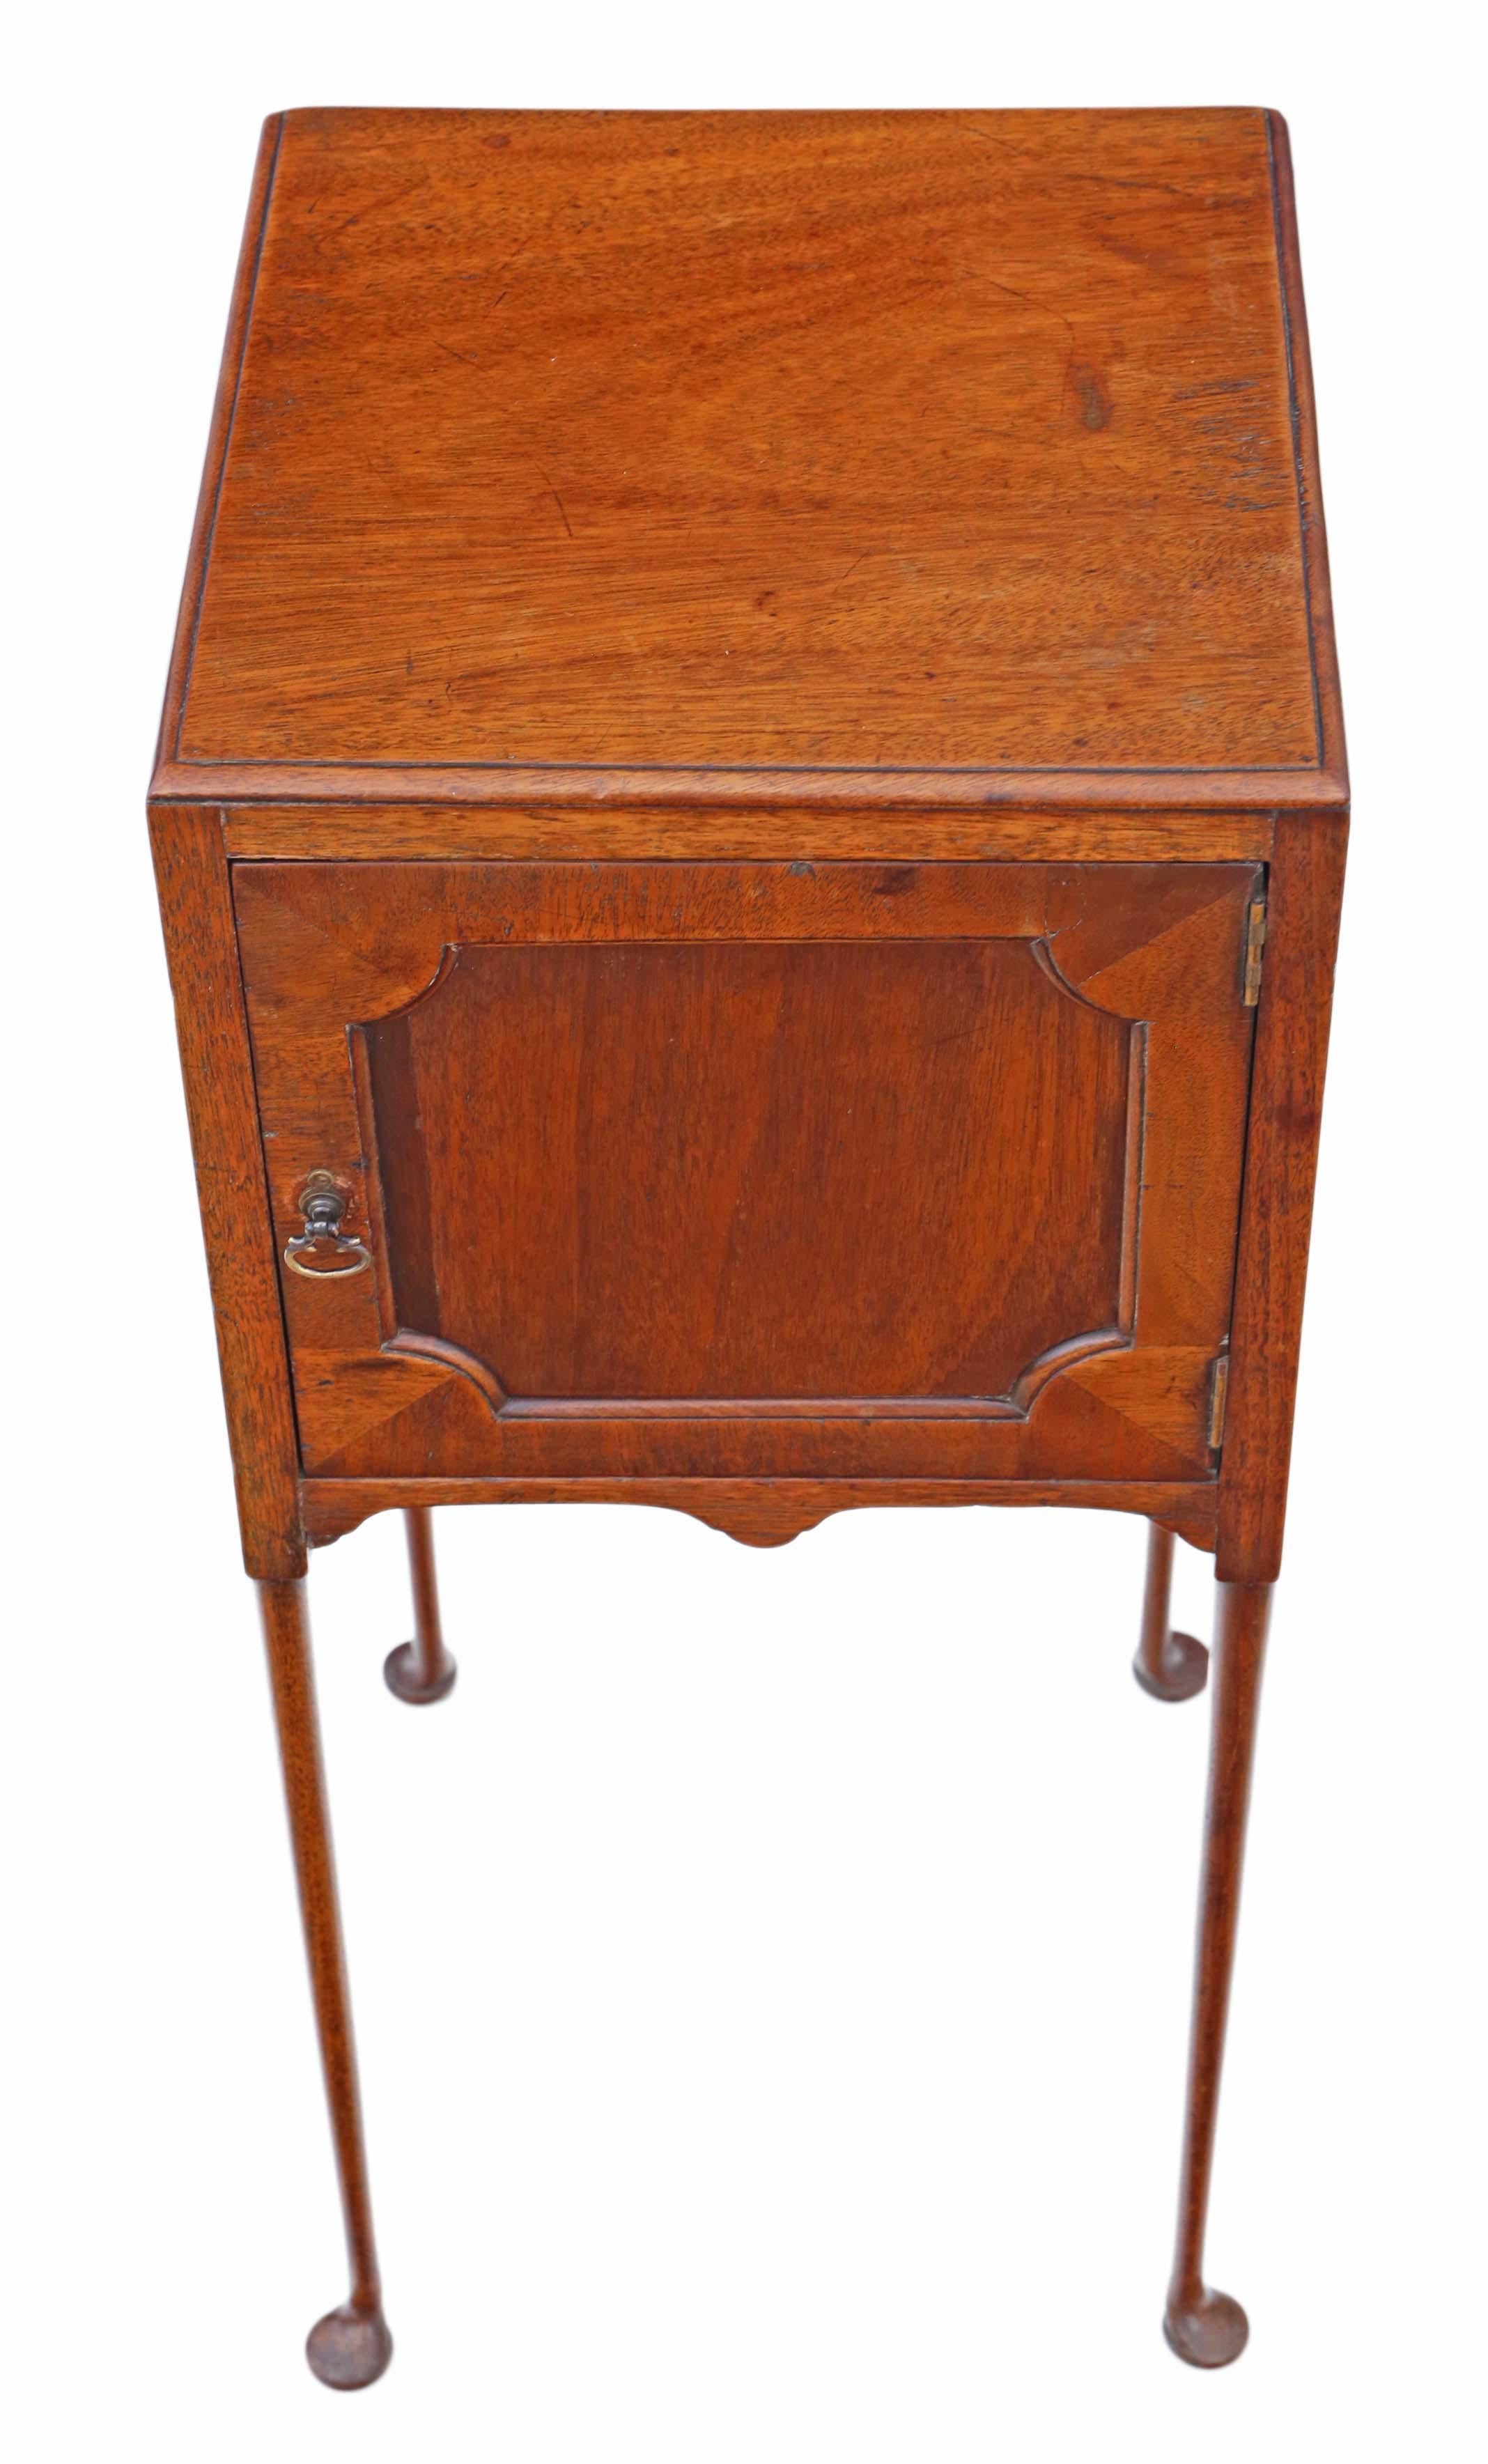 Antique Georgian, circa 1800-1820 mahogany bedside table or cupboard.
Great rare item, which is solid with no loose joints and no woodworm. Lovely long slender tapered legs with tiny pad feet.
Lovely color, age and patina.
Measures: 33 cm wide x